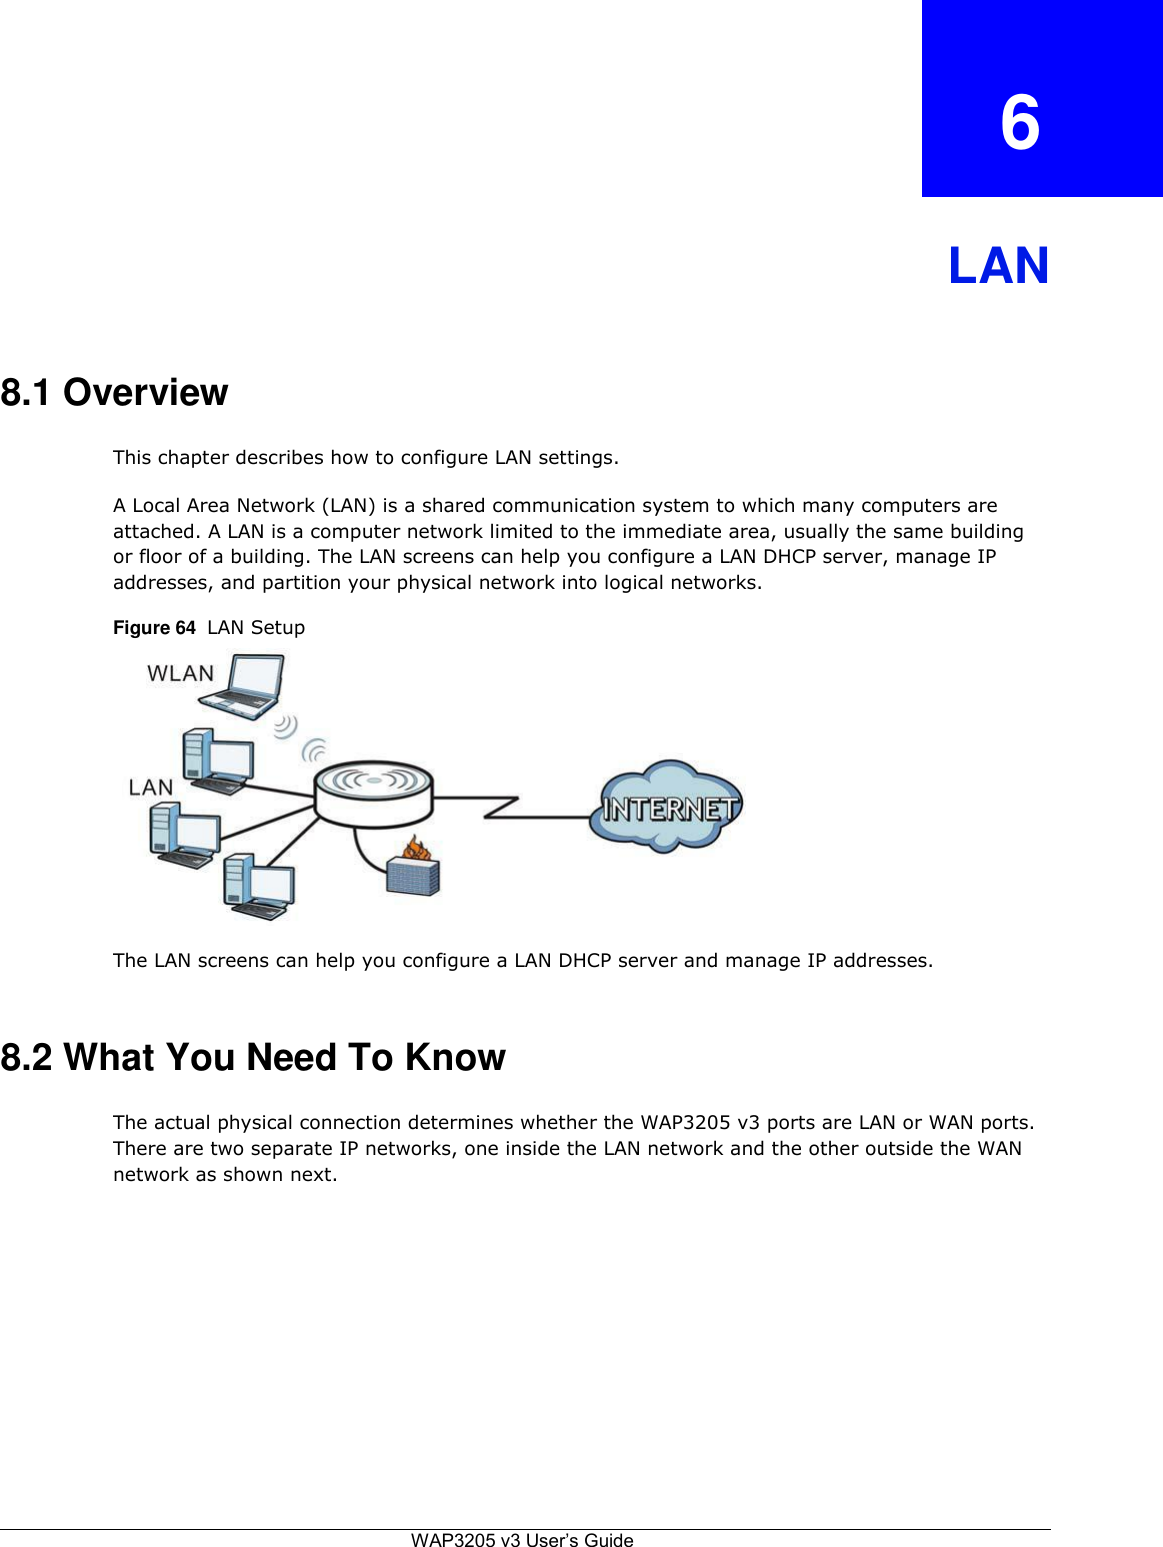  6    LAN    8.1 Overview  This chapter describes how to configure LAN settings.  A Local Area Network (LAN) is a shared communication system to which many computers are attached. A LAN is a computer network limited to the immediate area, usually the same building or floor of a building. The LAN screens can help you configure a LAN DHCP server, manage IP addresses, and partition your physical network into logical networks.  Figure 64  LAN Setup               The LAN screens can help you configure a LAN DHCP server and manage IP addresses.    8.2 What You Need To Know  The actual physical connection determines whether the WAP3205 v3 ports are LAN or WAN ports. There are two separate IP networks, one inside the LAN network and the other outside the WAN network as shown next.                 WAP3205 v3 User’s Guide 